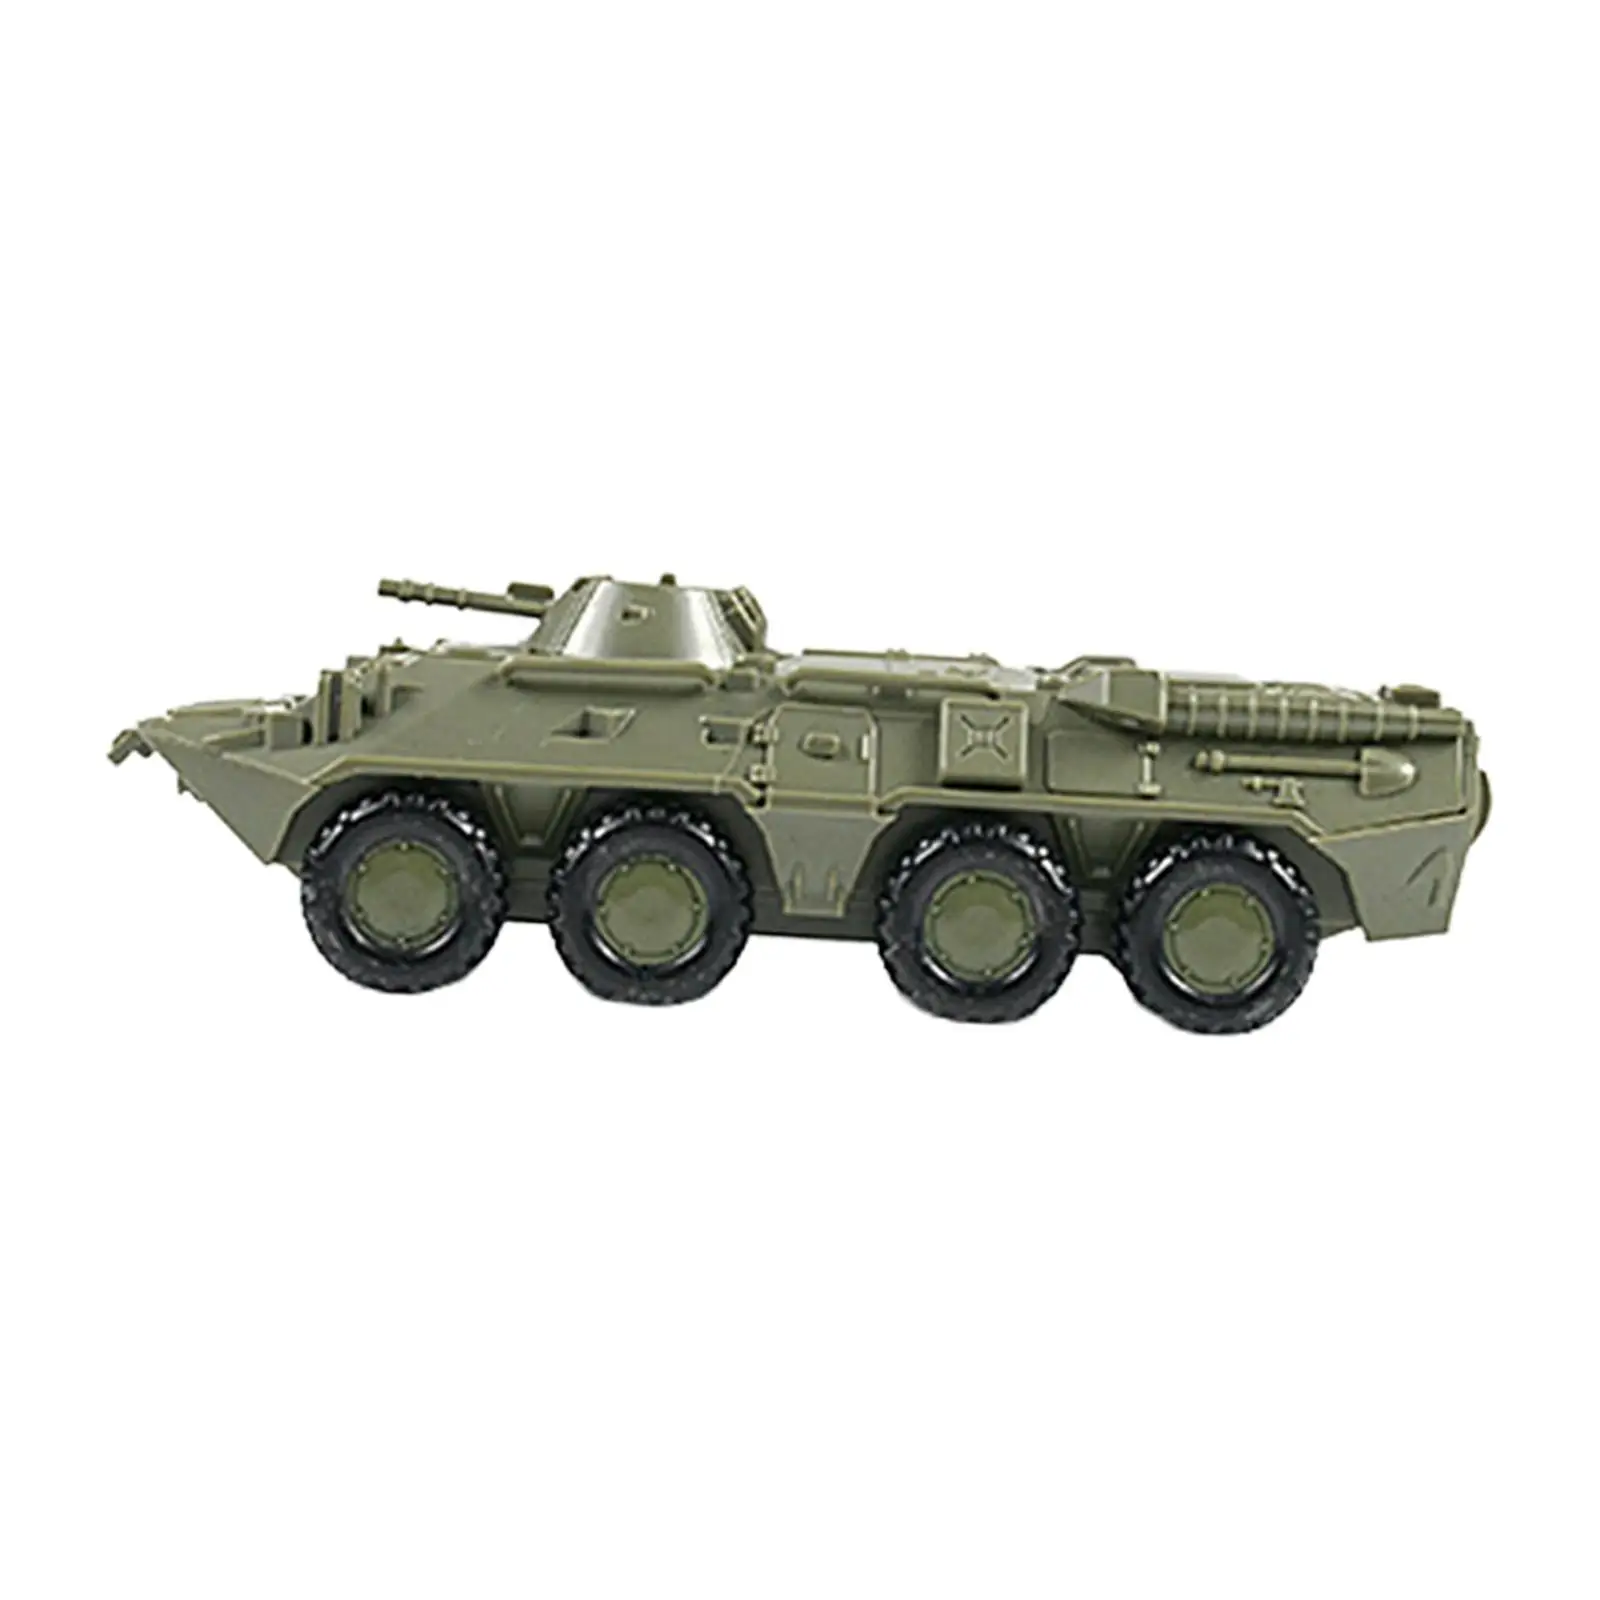 1:72 Scale Tank Model Desk Decor Collectables Kids Playset Tank Truck 4D Model Mini Vehicles for Children Kids Teens Boys Gifts